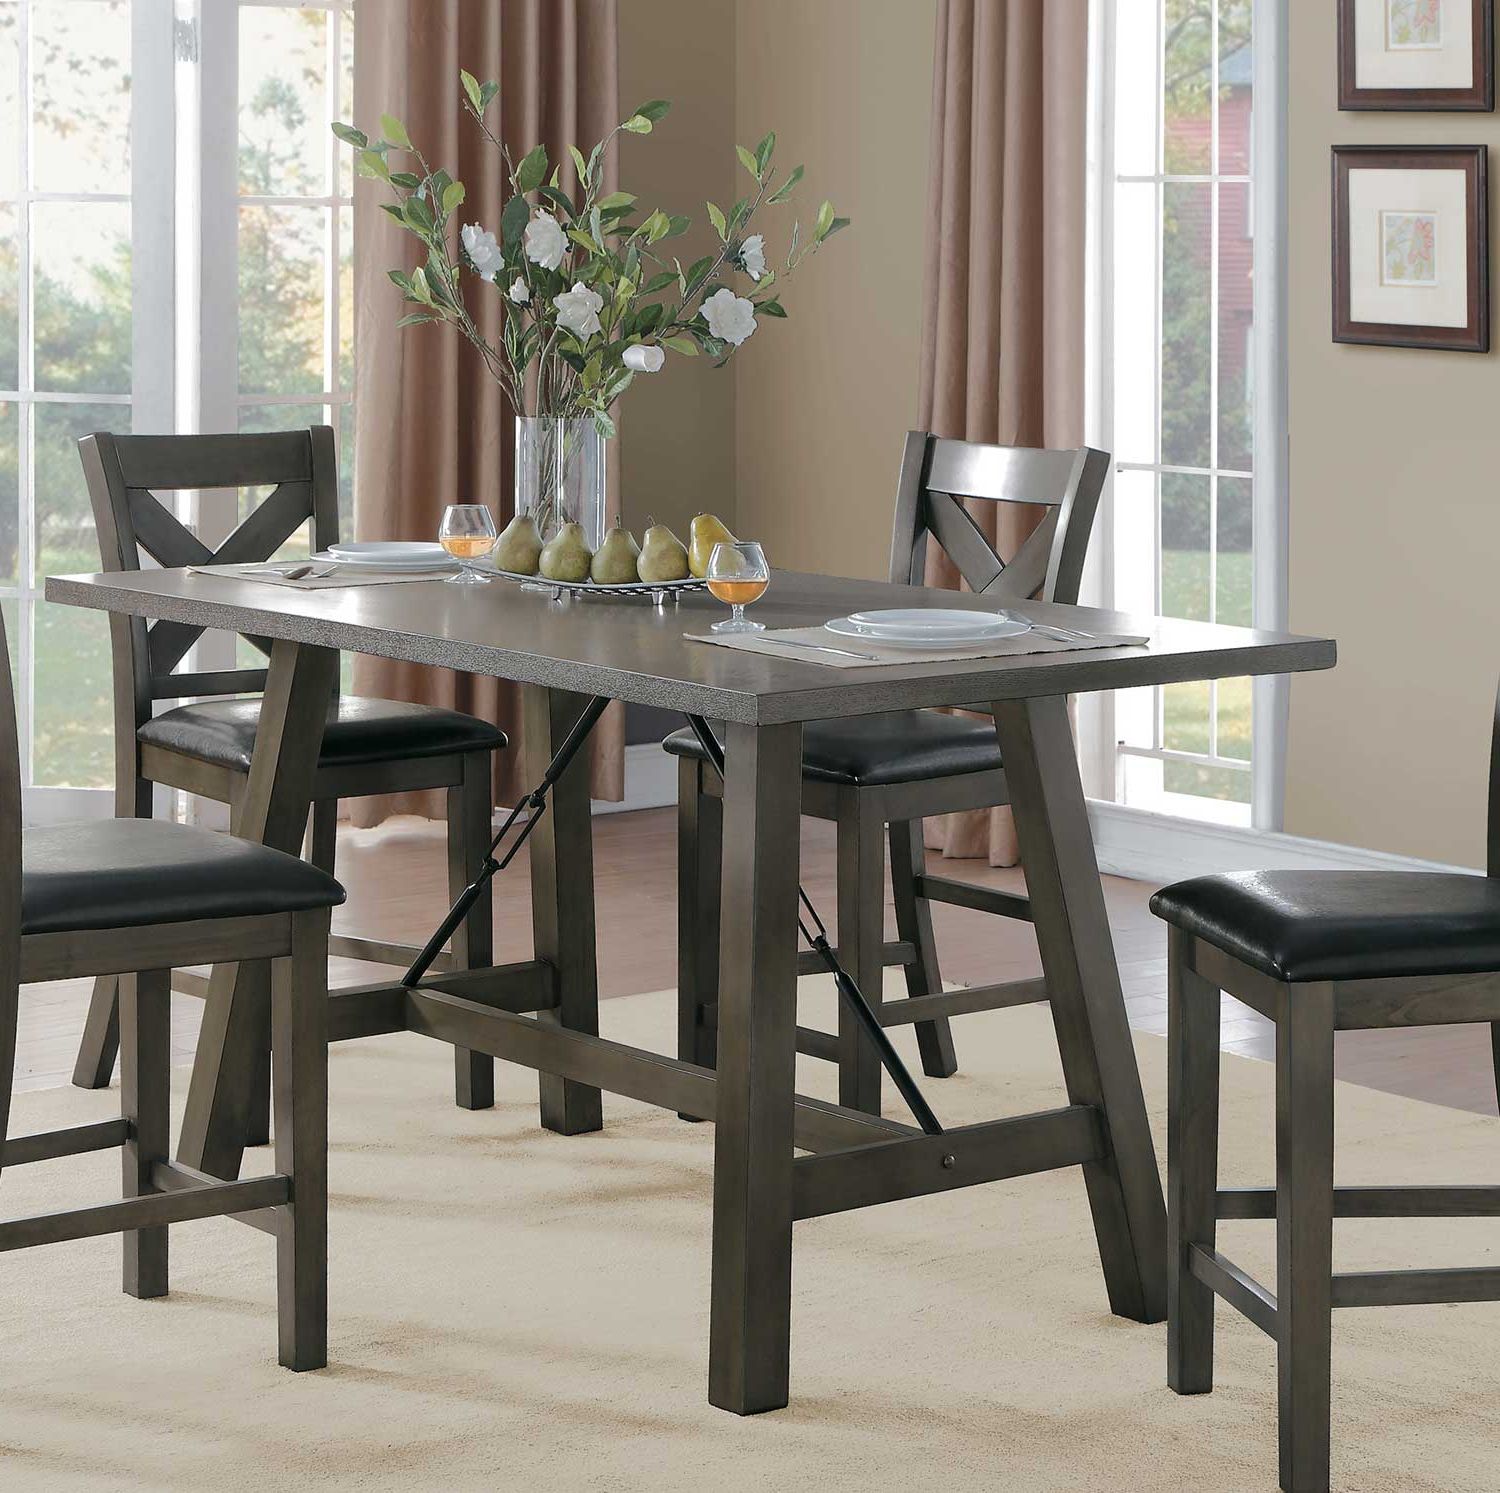 Overstreet Bar Height Dining Tables With Regard To Widely Used Homelegance Seaford Rectangular Counter Height Dining (View 11 of 20)